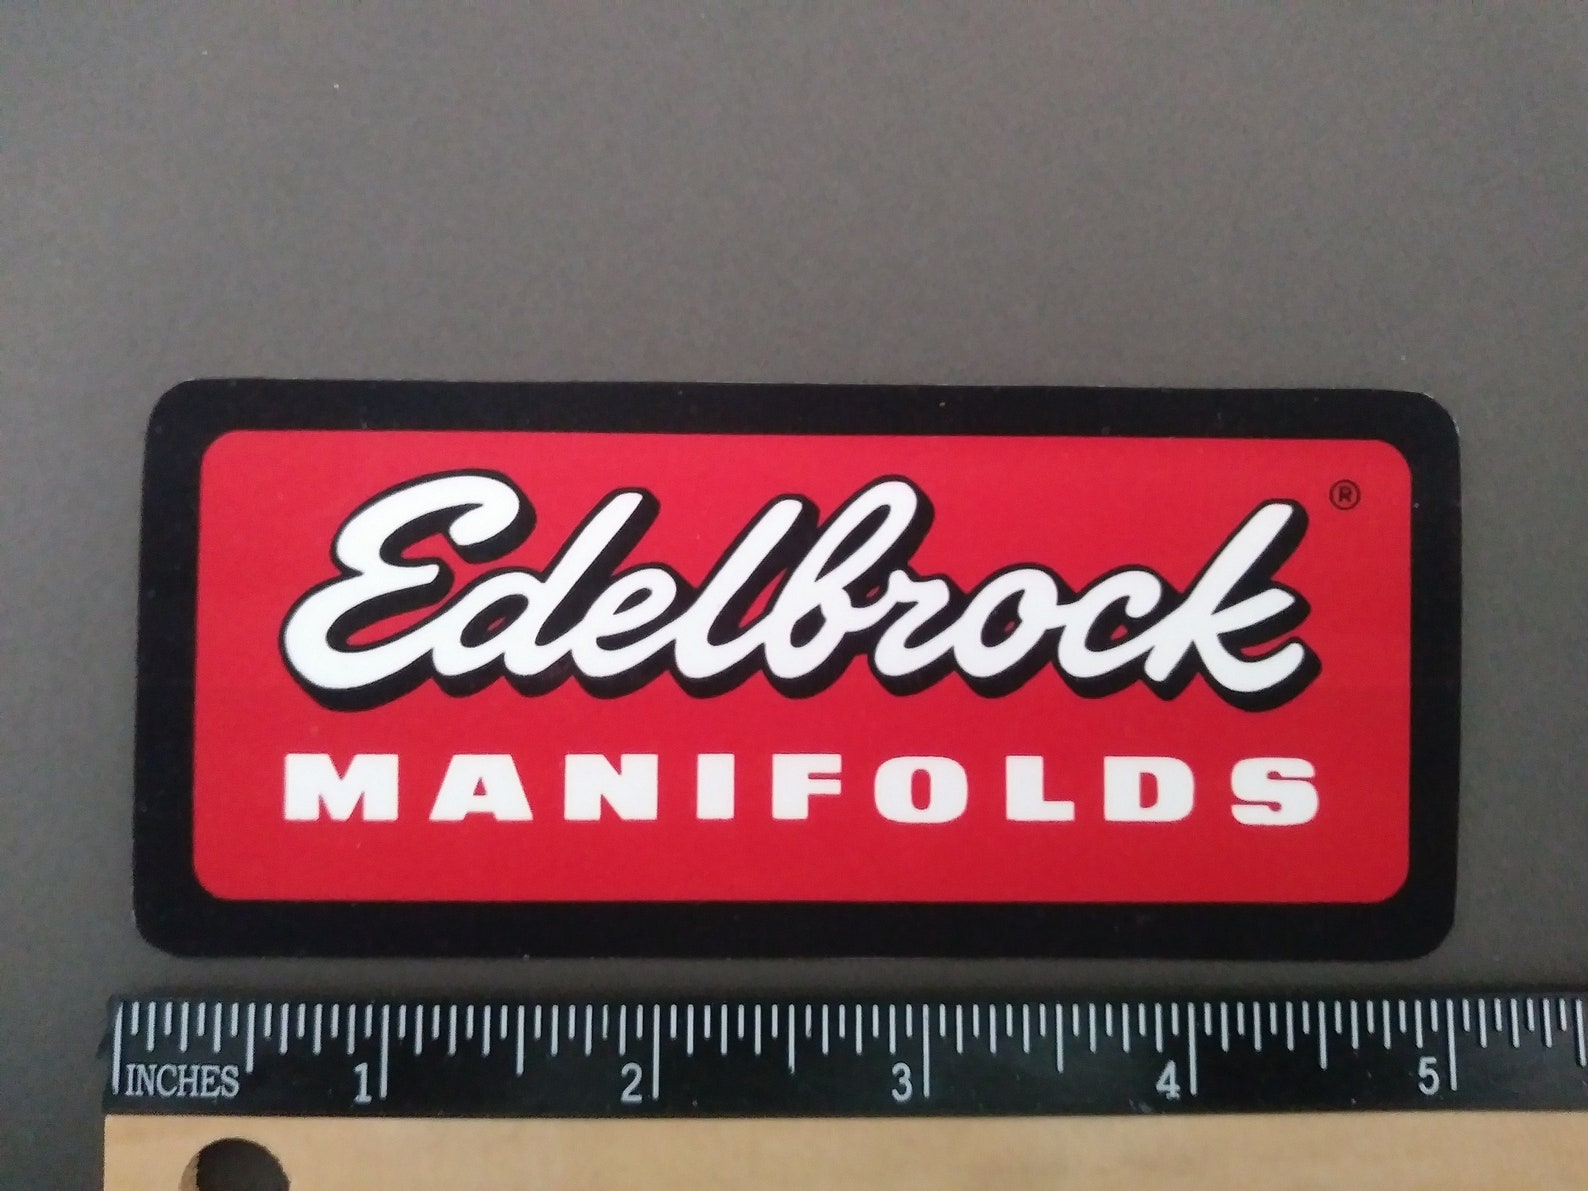 Edelbrock Manifolds Vintage 1960's Style Racing Decal.. Peel and Stick ...